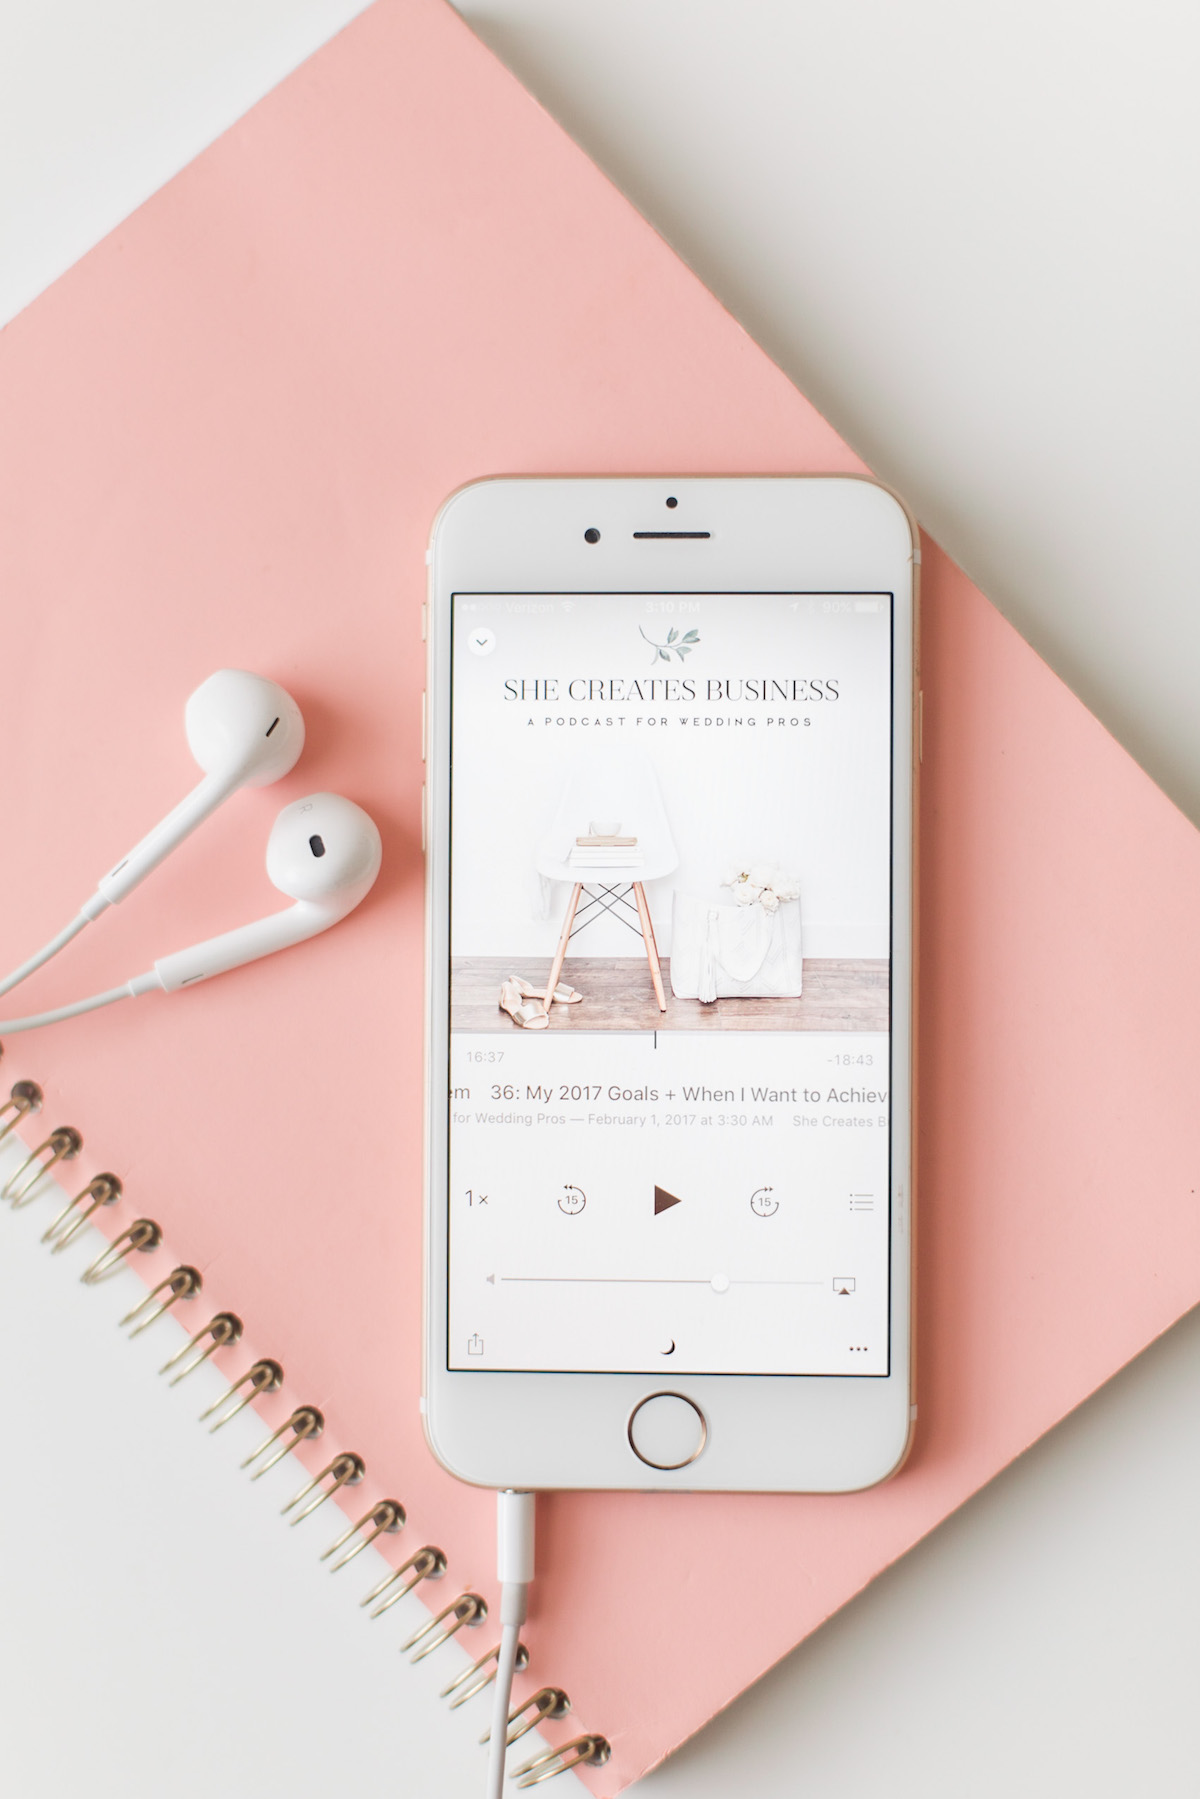 A roundup of 5 podcasts for wedding pros including The Goal Digger Podcast by Jenna Kutcher, She Creates Business, Creative Empire and more!